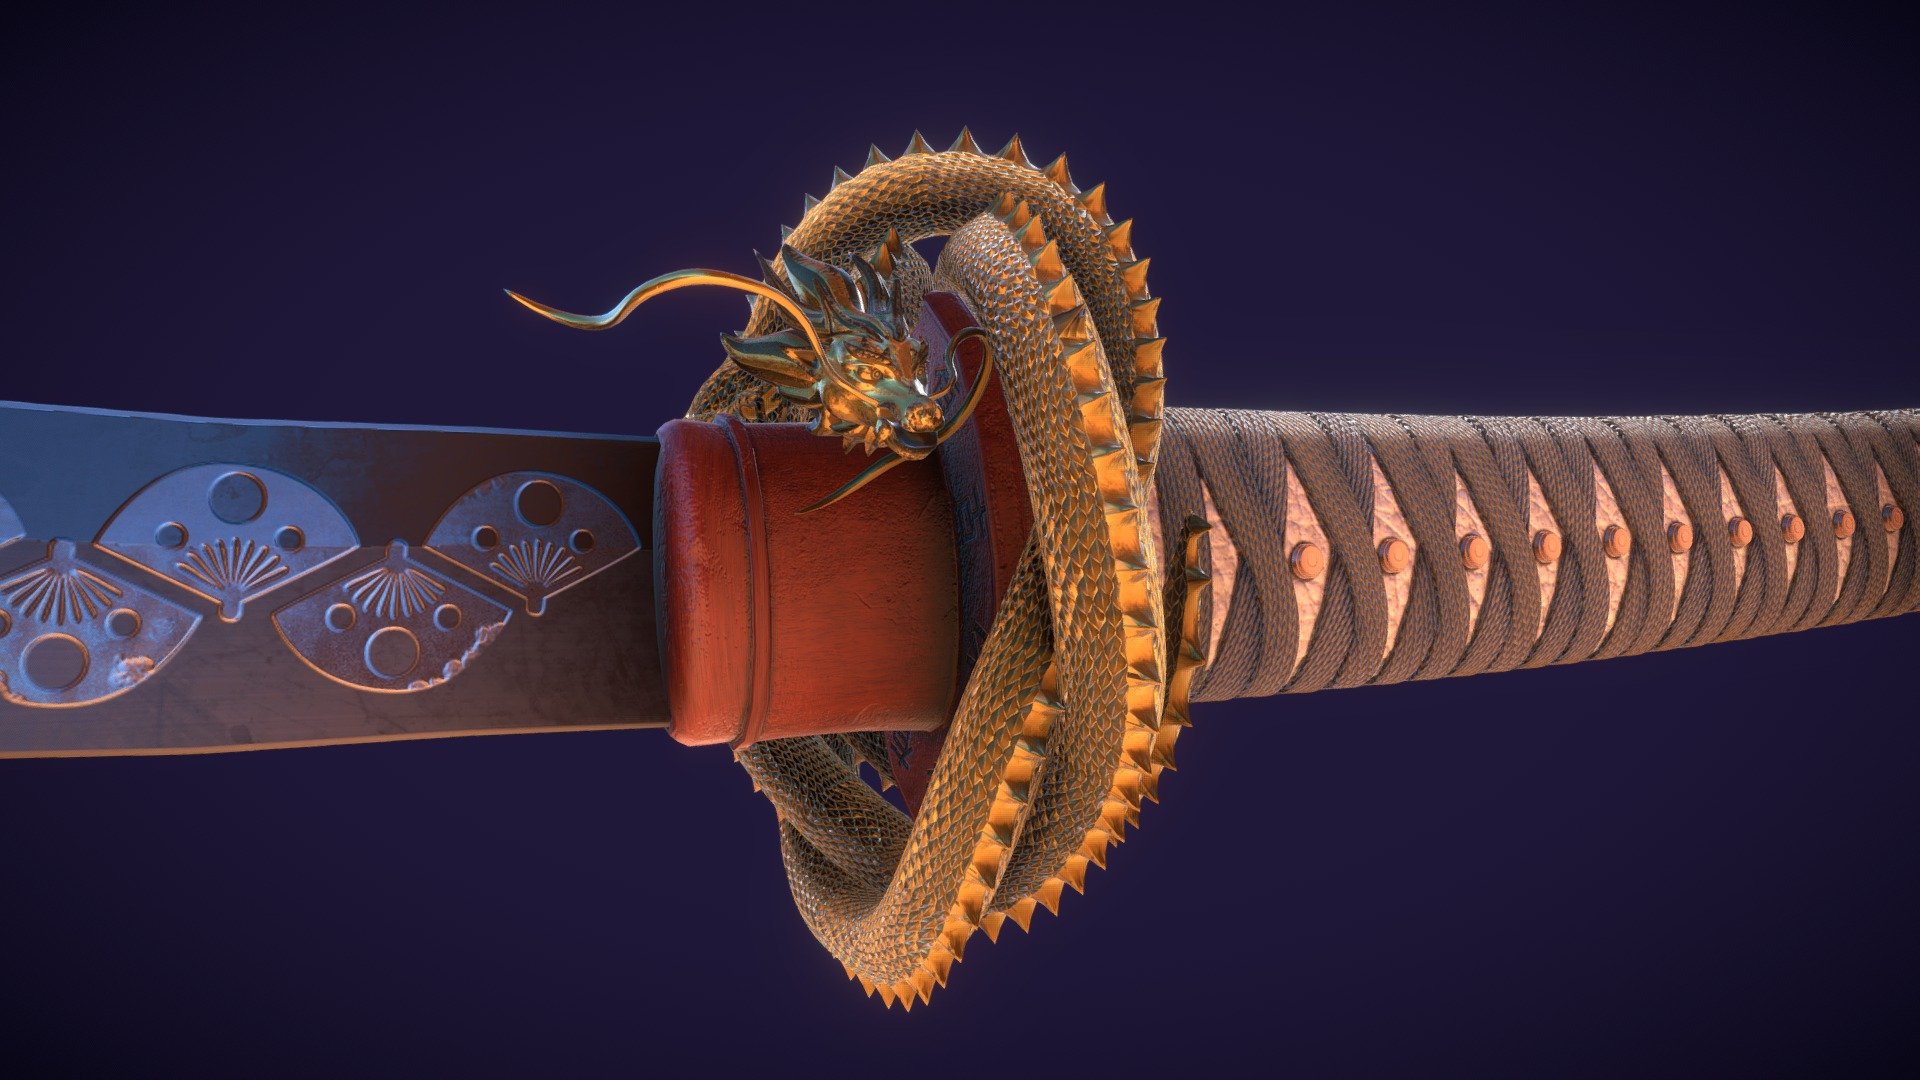 Hi everyone, I present you a katana I made for a school project of a Japanese forge.
Modeling : Maya / Zbrush
Texturing : Substance painter
Rendering : Iray
The full project -&gt; https://www.artstation.com/mickaelsasmaz

Inspired by this amazing work of Vladimir Somov : https://www.artstation.com/artwork/X2gVy
Hope you like it ! - Emperors Katana - 3D model by Mickael_SASMAZ (@mickael.sasmaz) 3d model